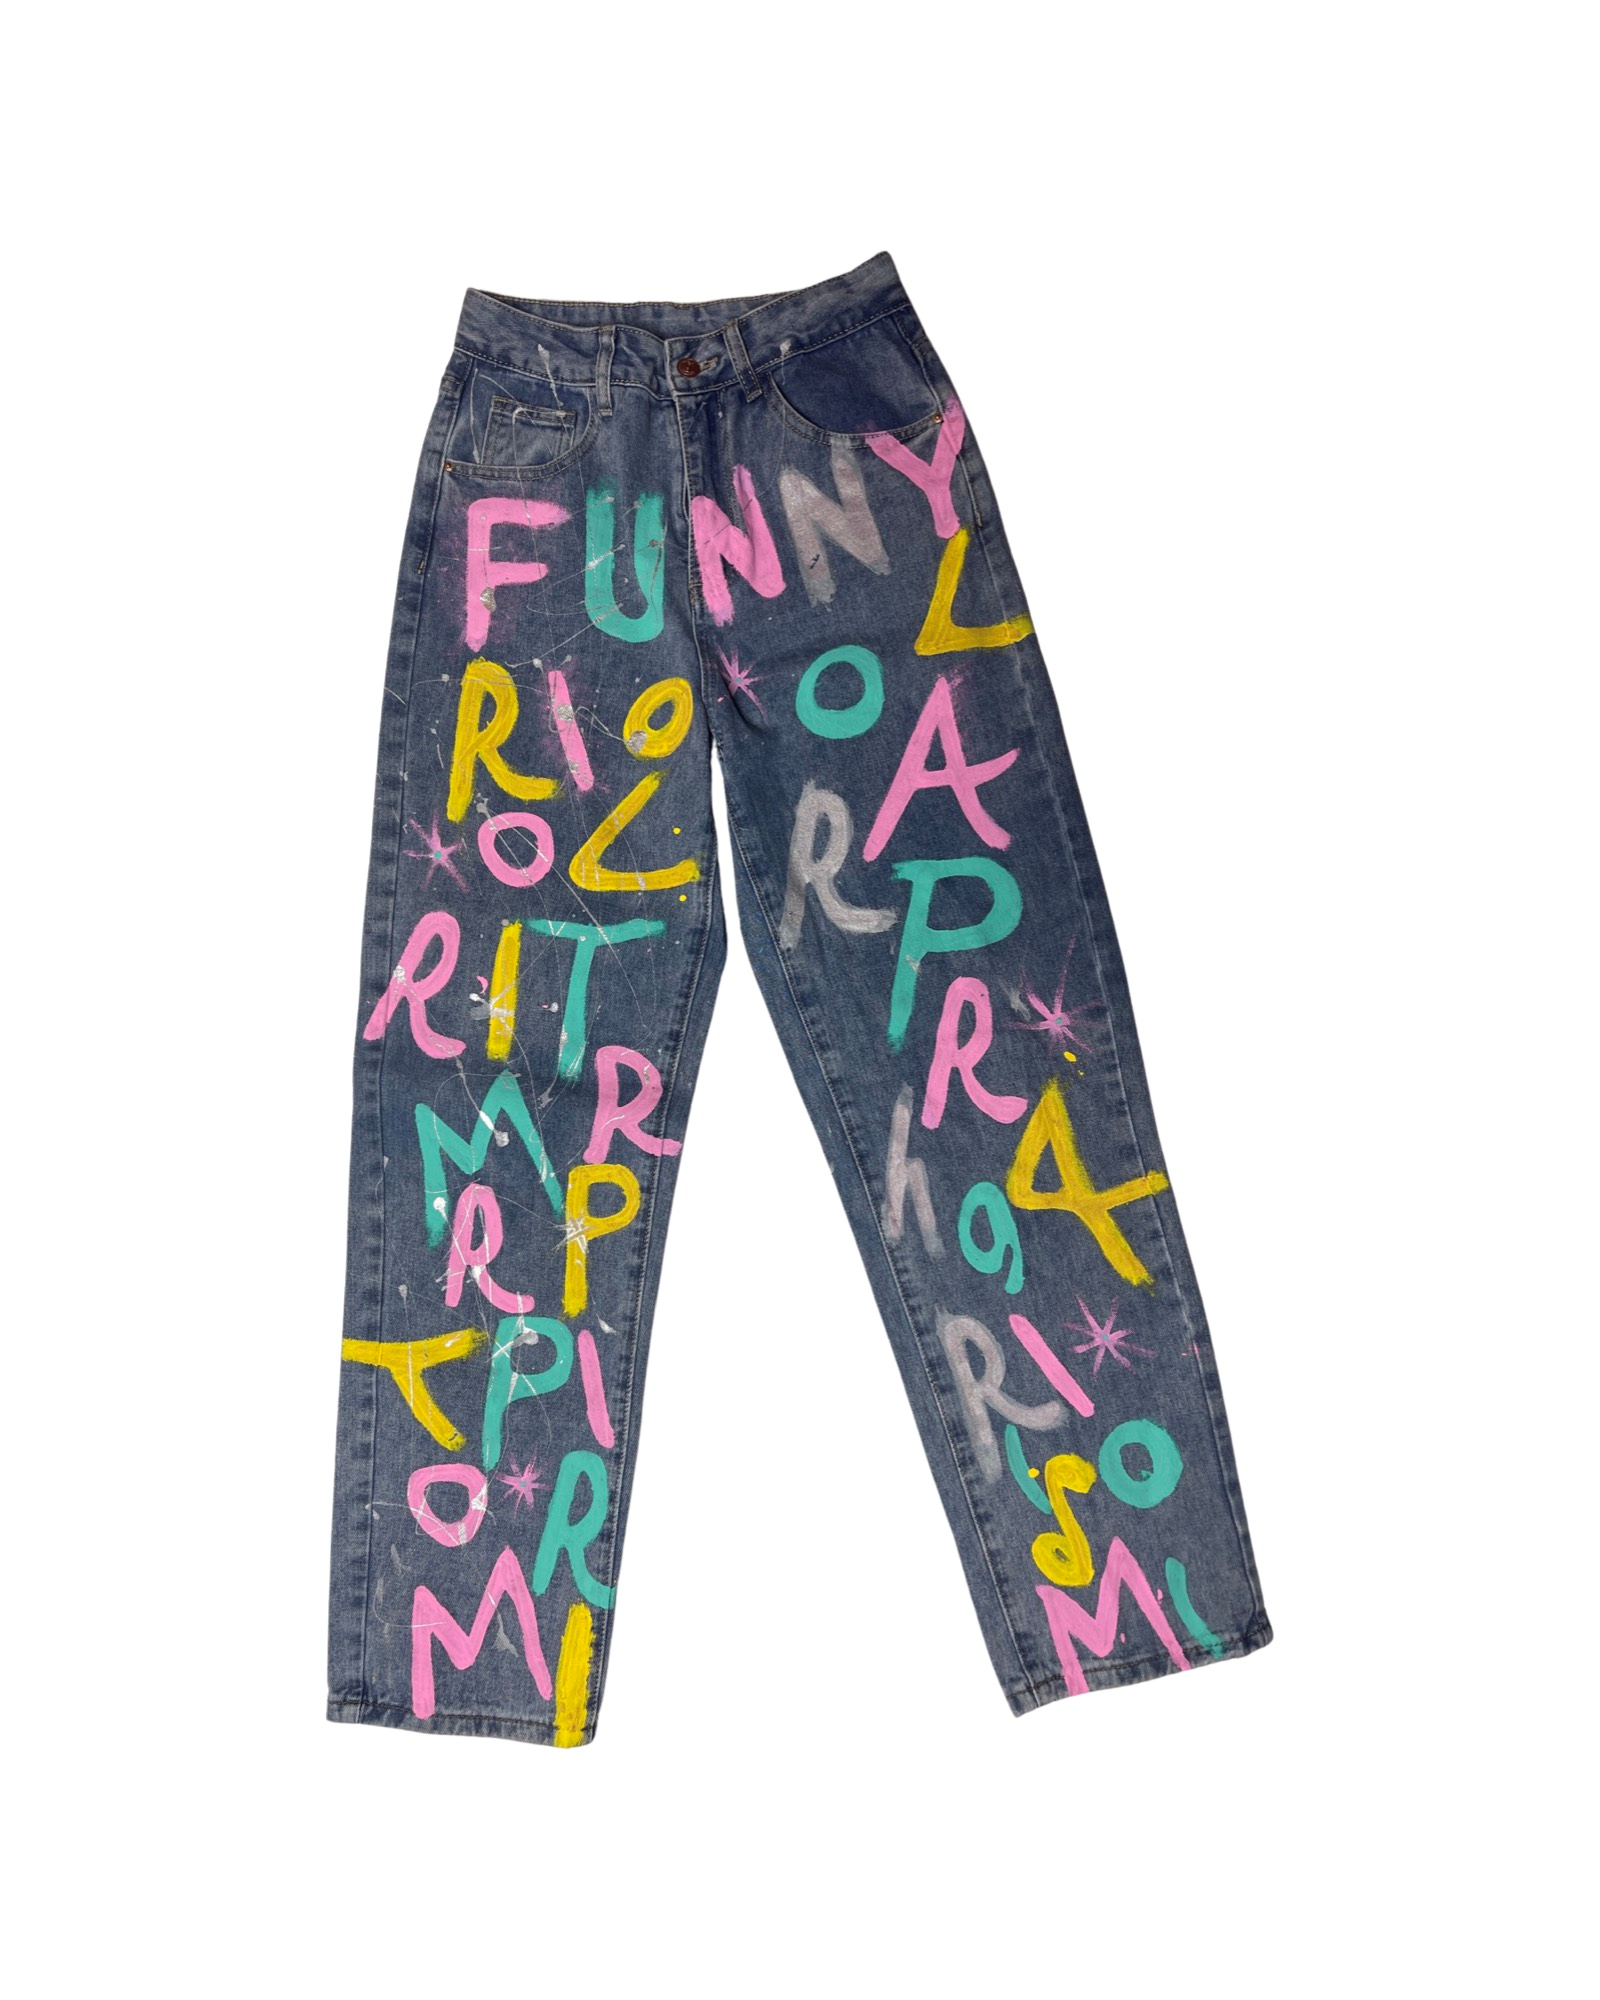 Funny Jeans